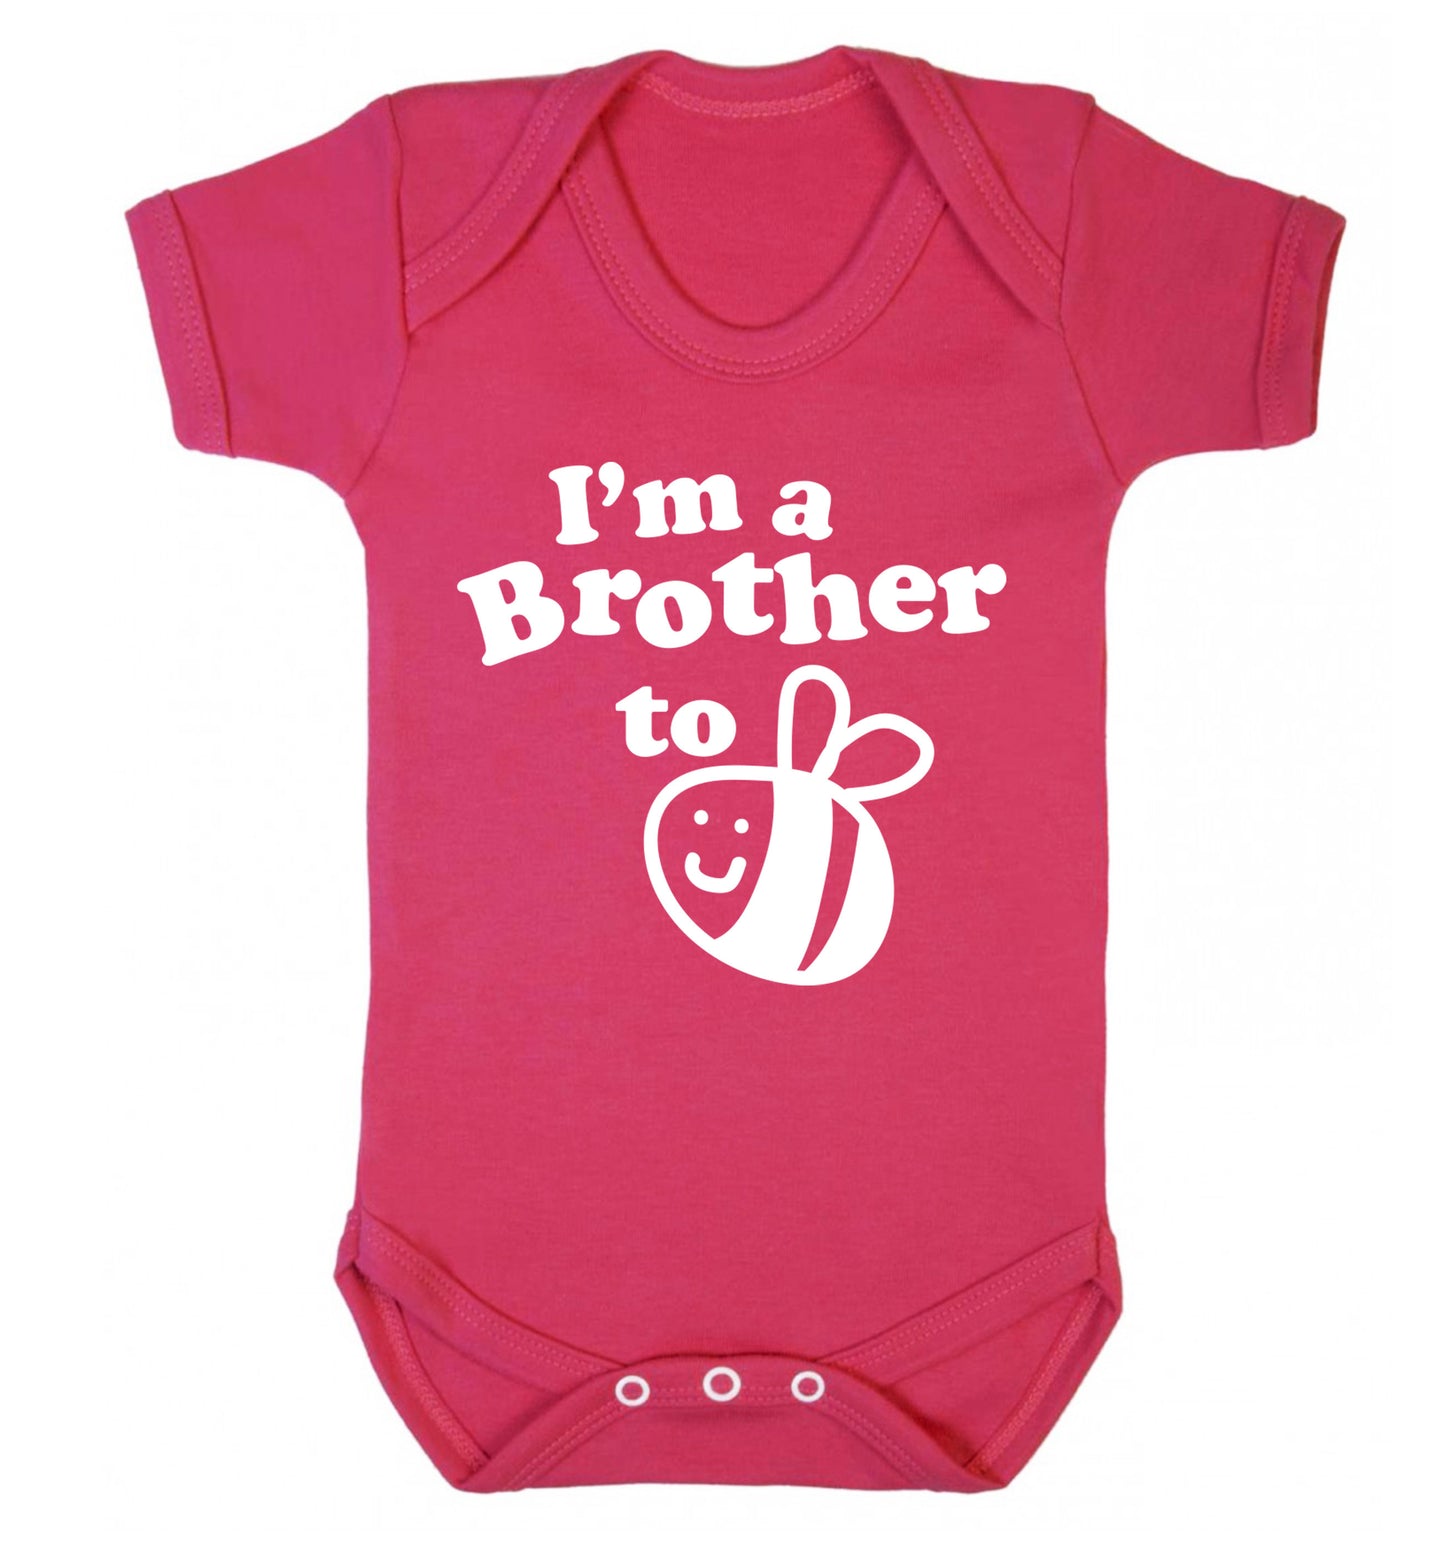 I'm a brother to be Baby Vest dark pink 18-24 months